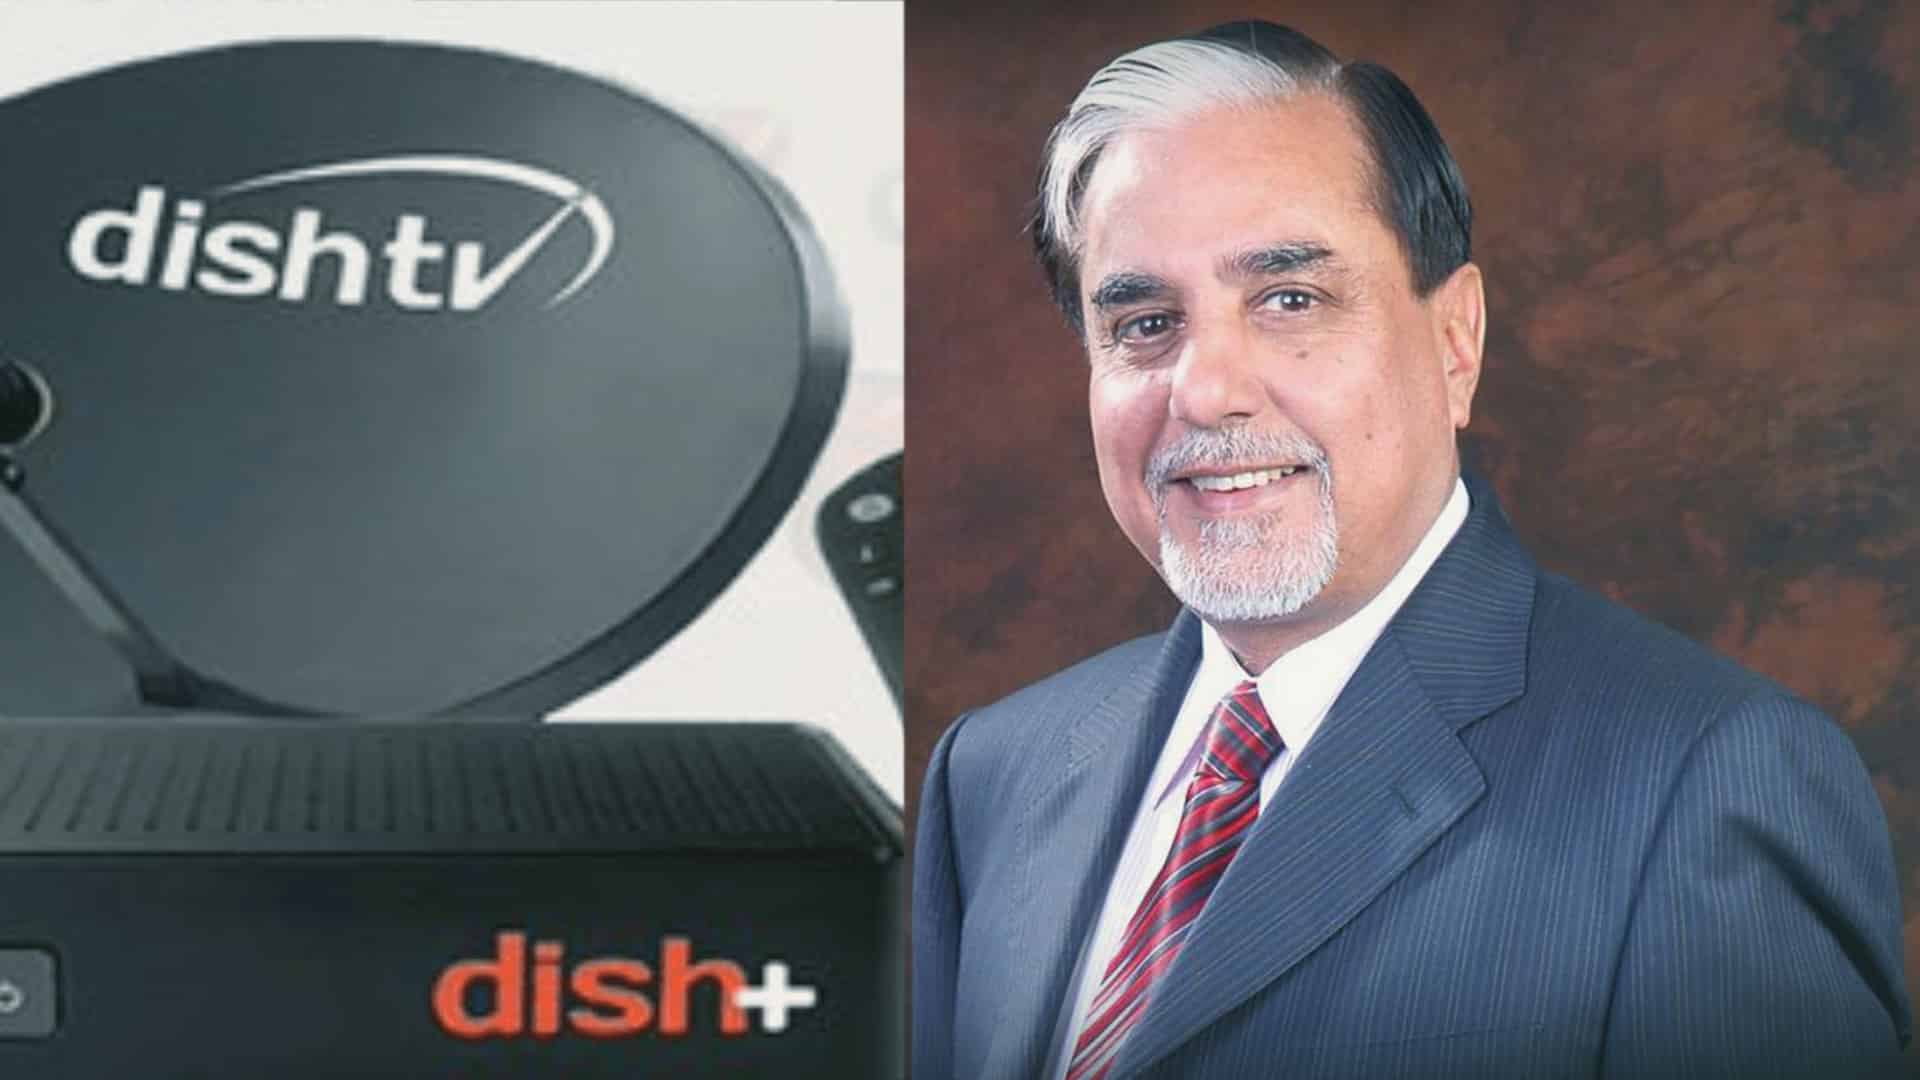 Chandra says will soon return pledged Dish TV shares to brother Goel